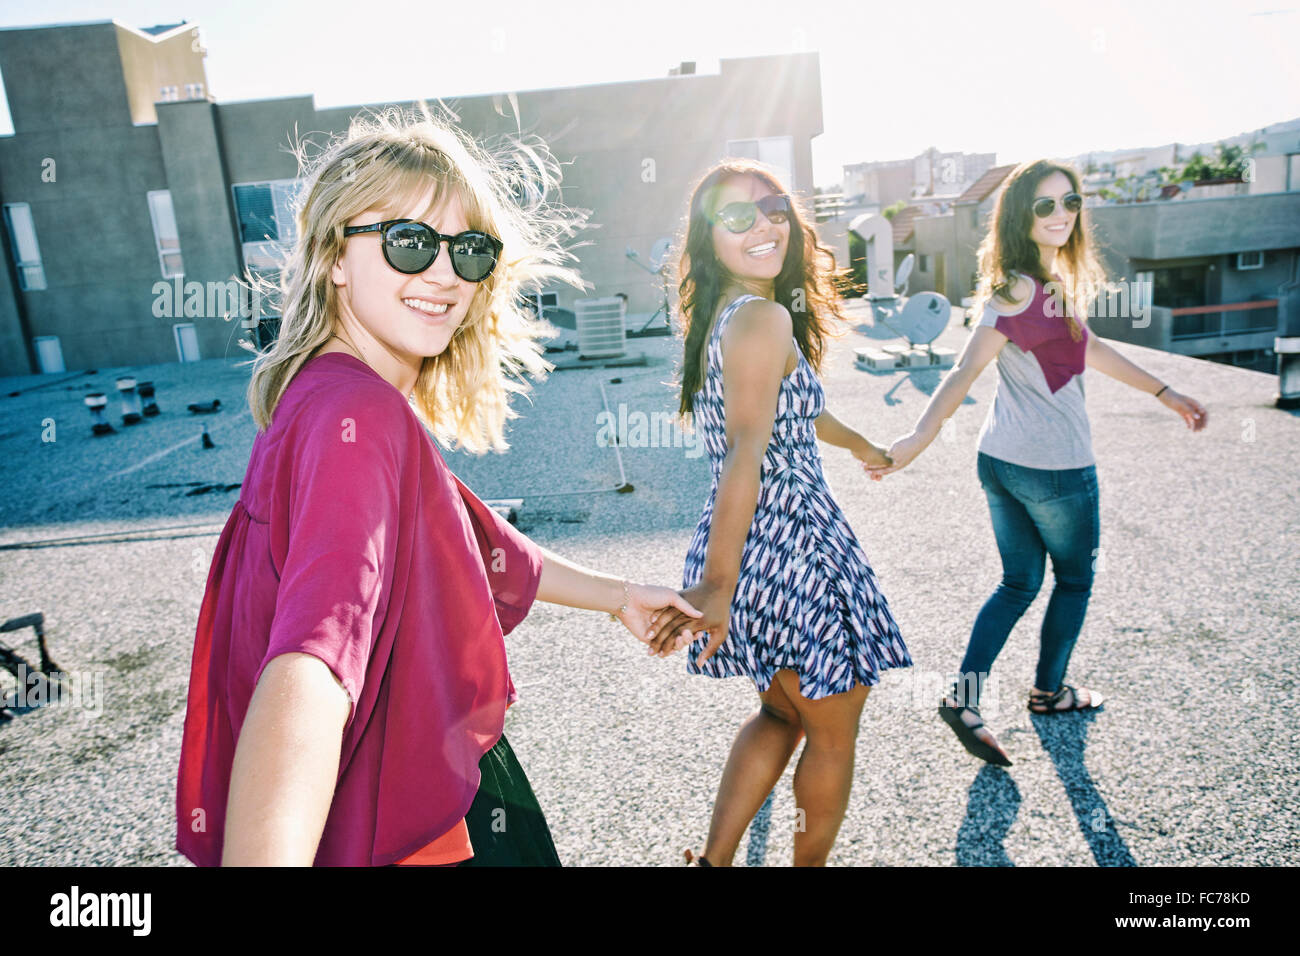 Women holding hands on urban rooftop Stock Photo